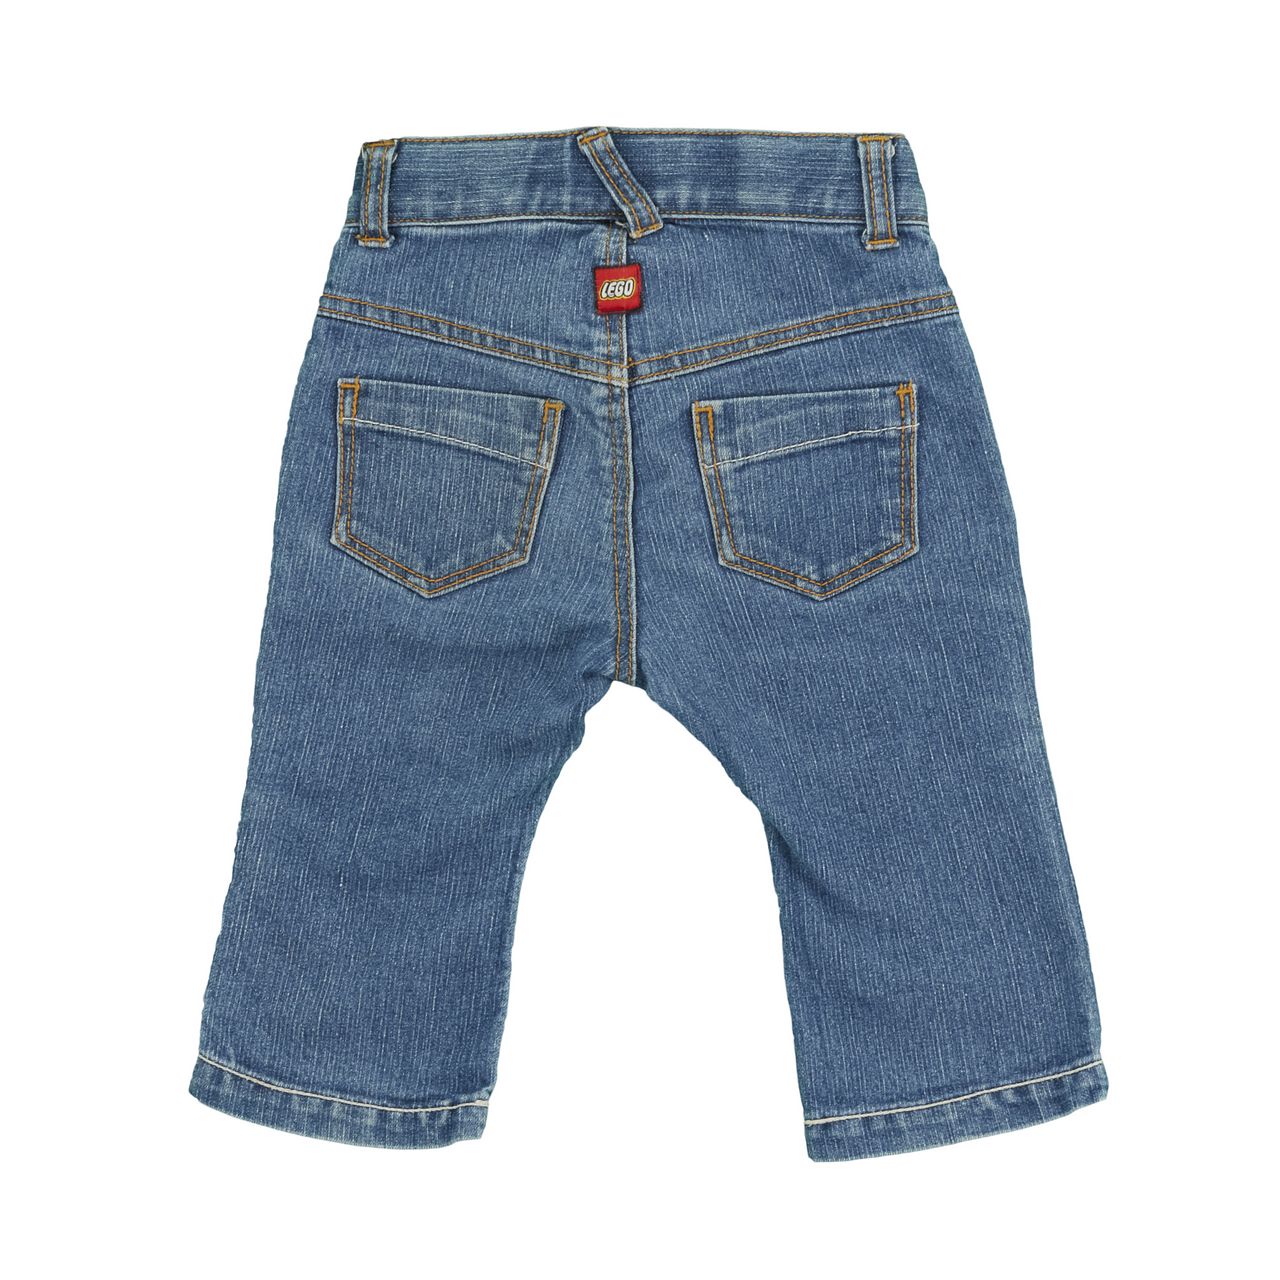 Lego Wear Jeans 74 cm back preview